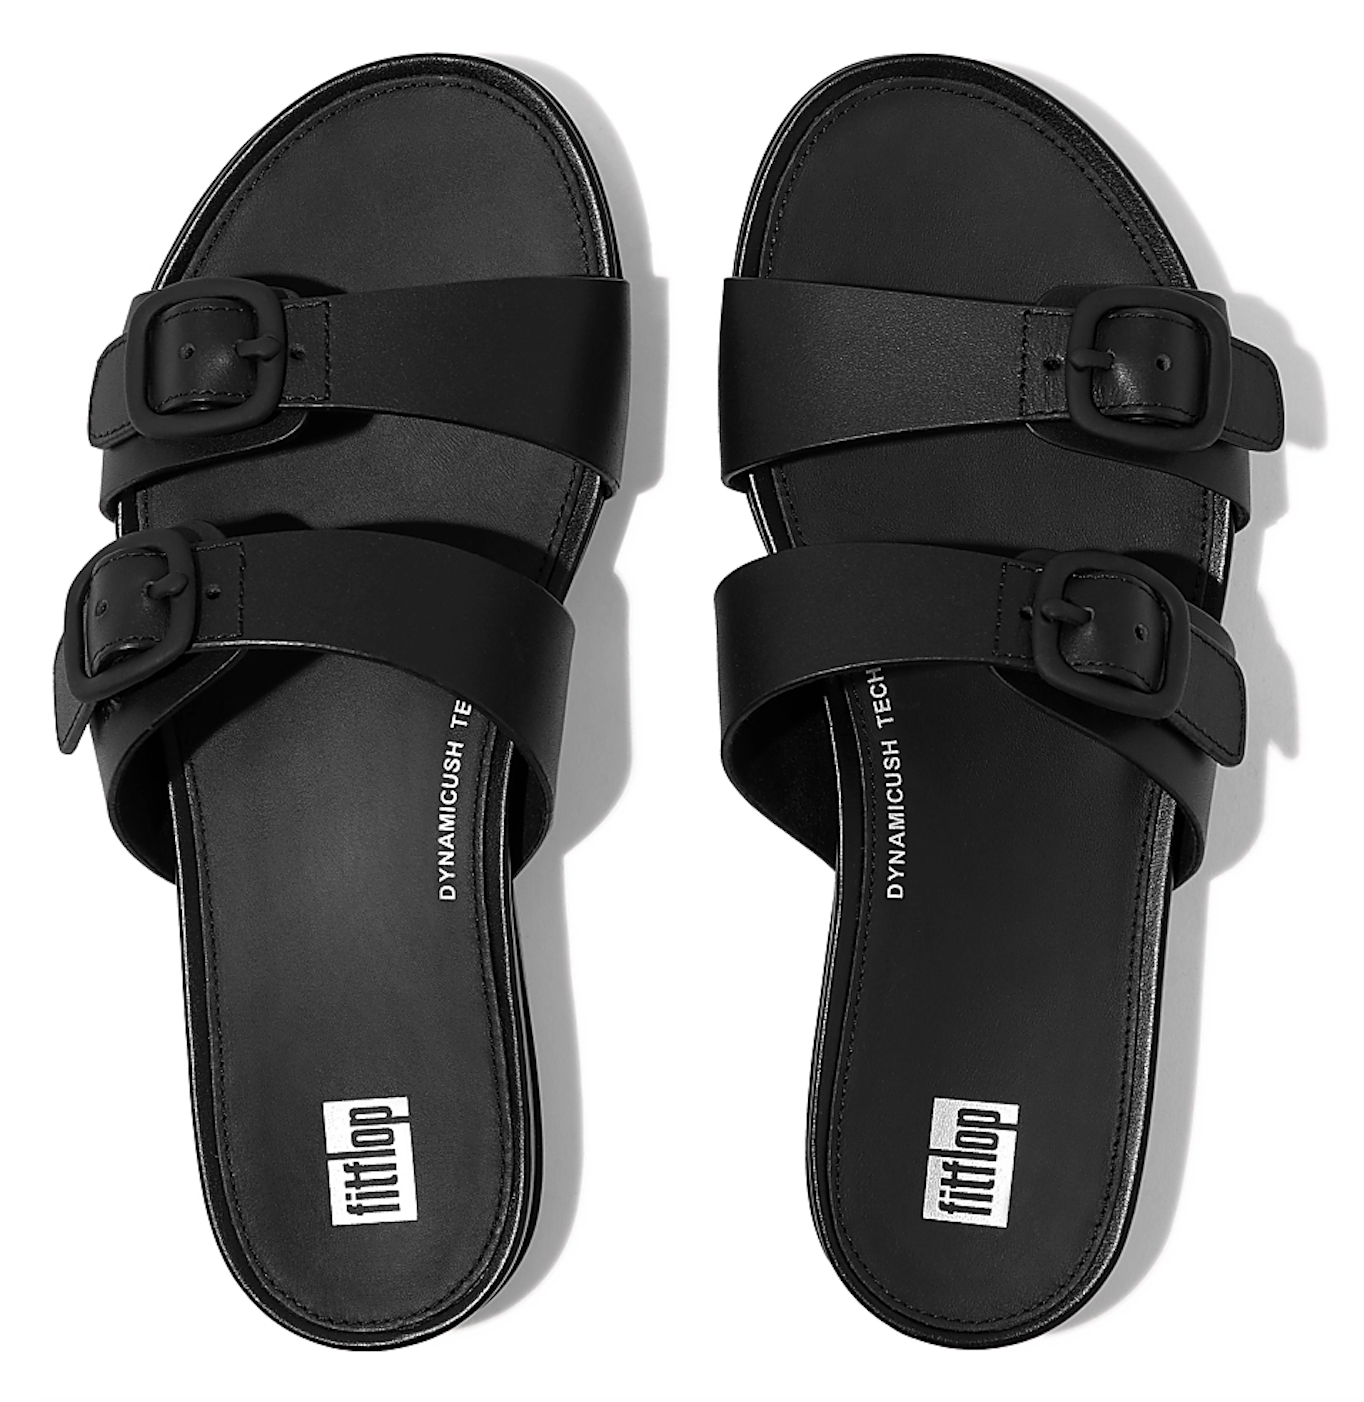 Gracie Rubber-Buckle Slides - The Ultimate Foot Store